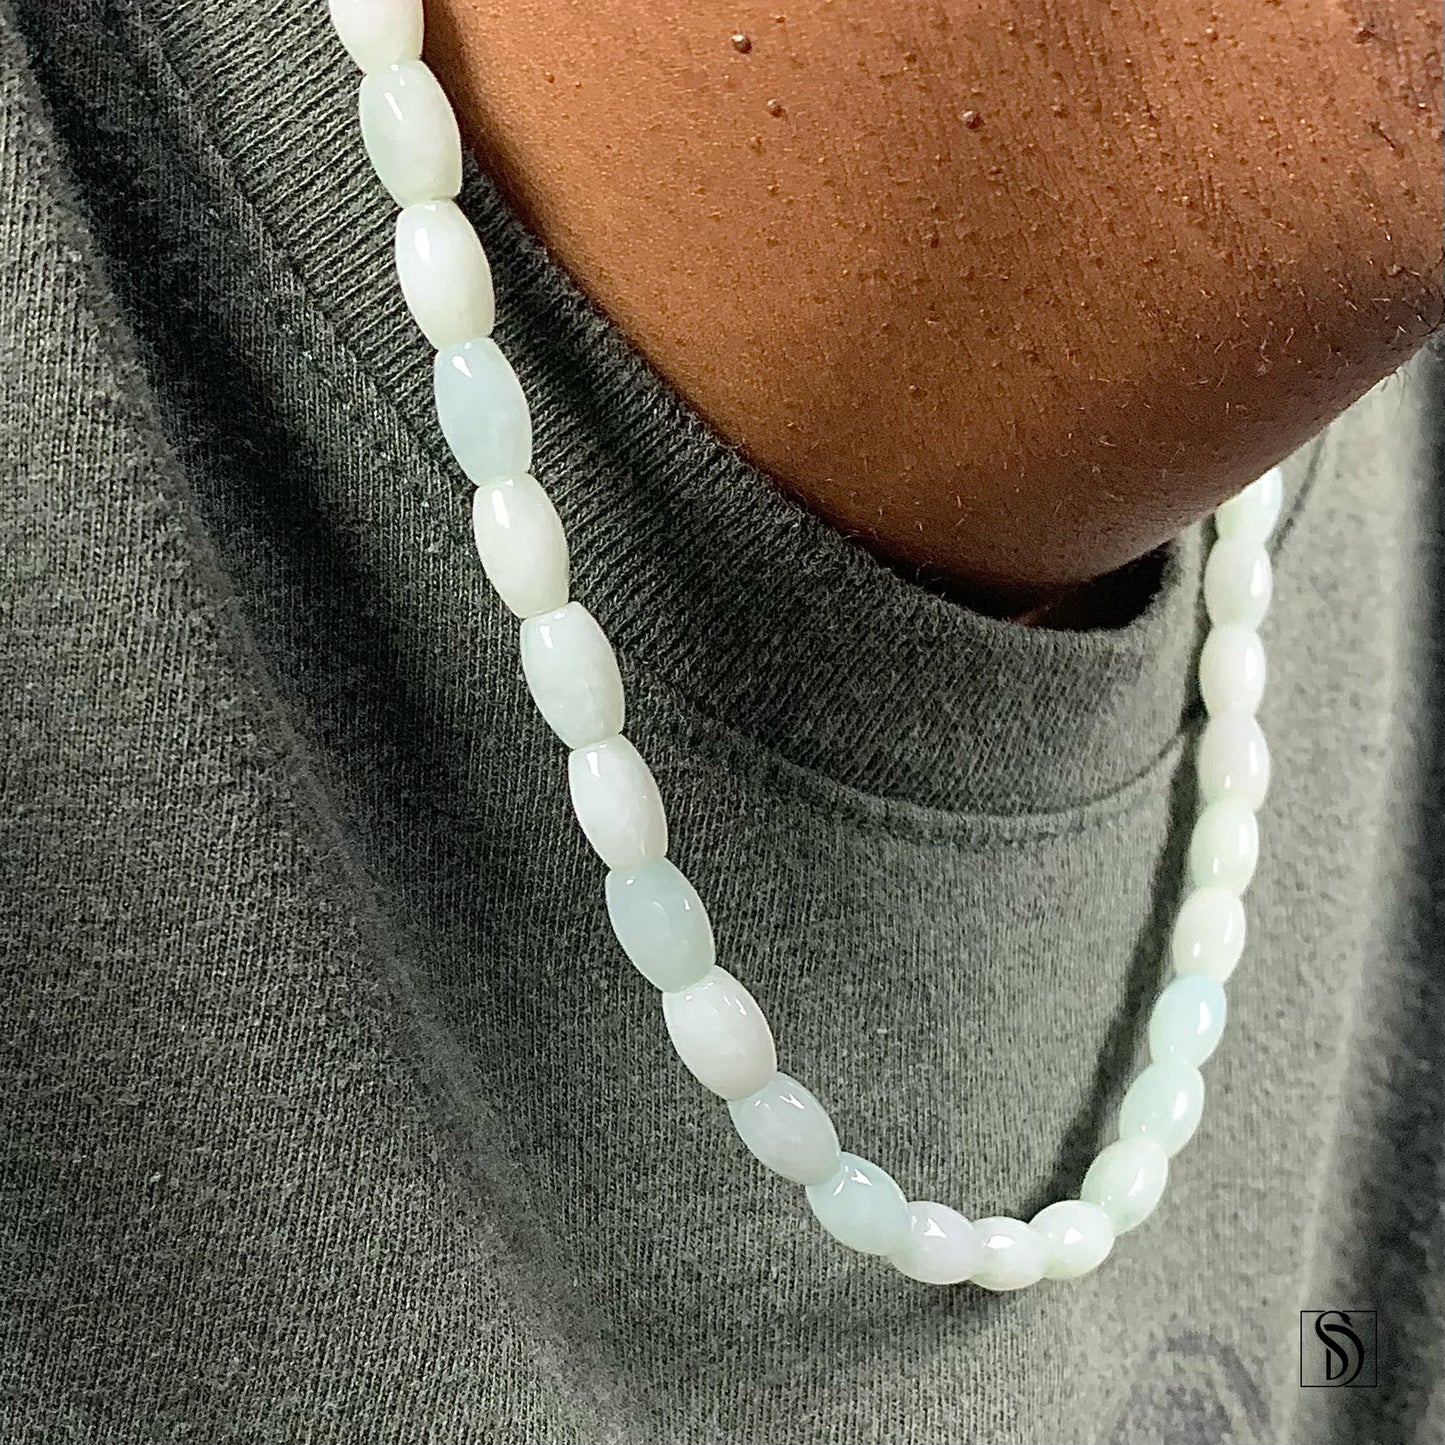 Certified Grade A Natural Jade Necklace